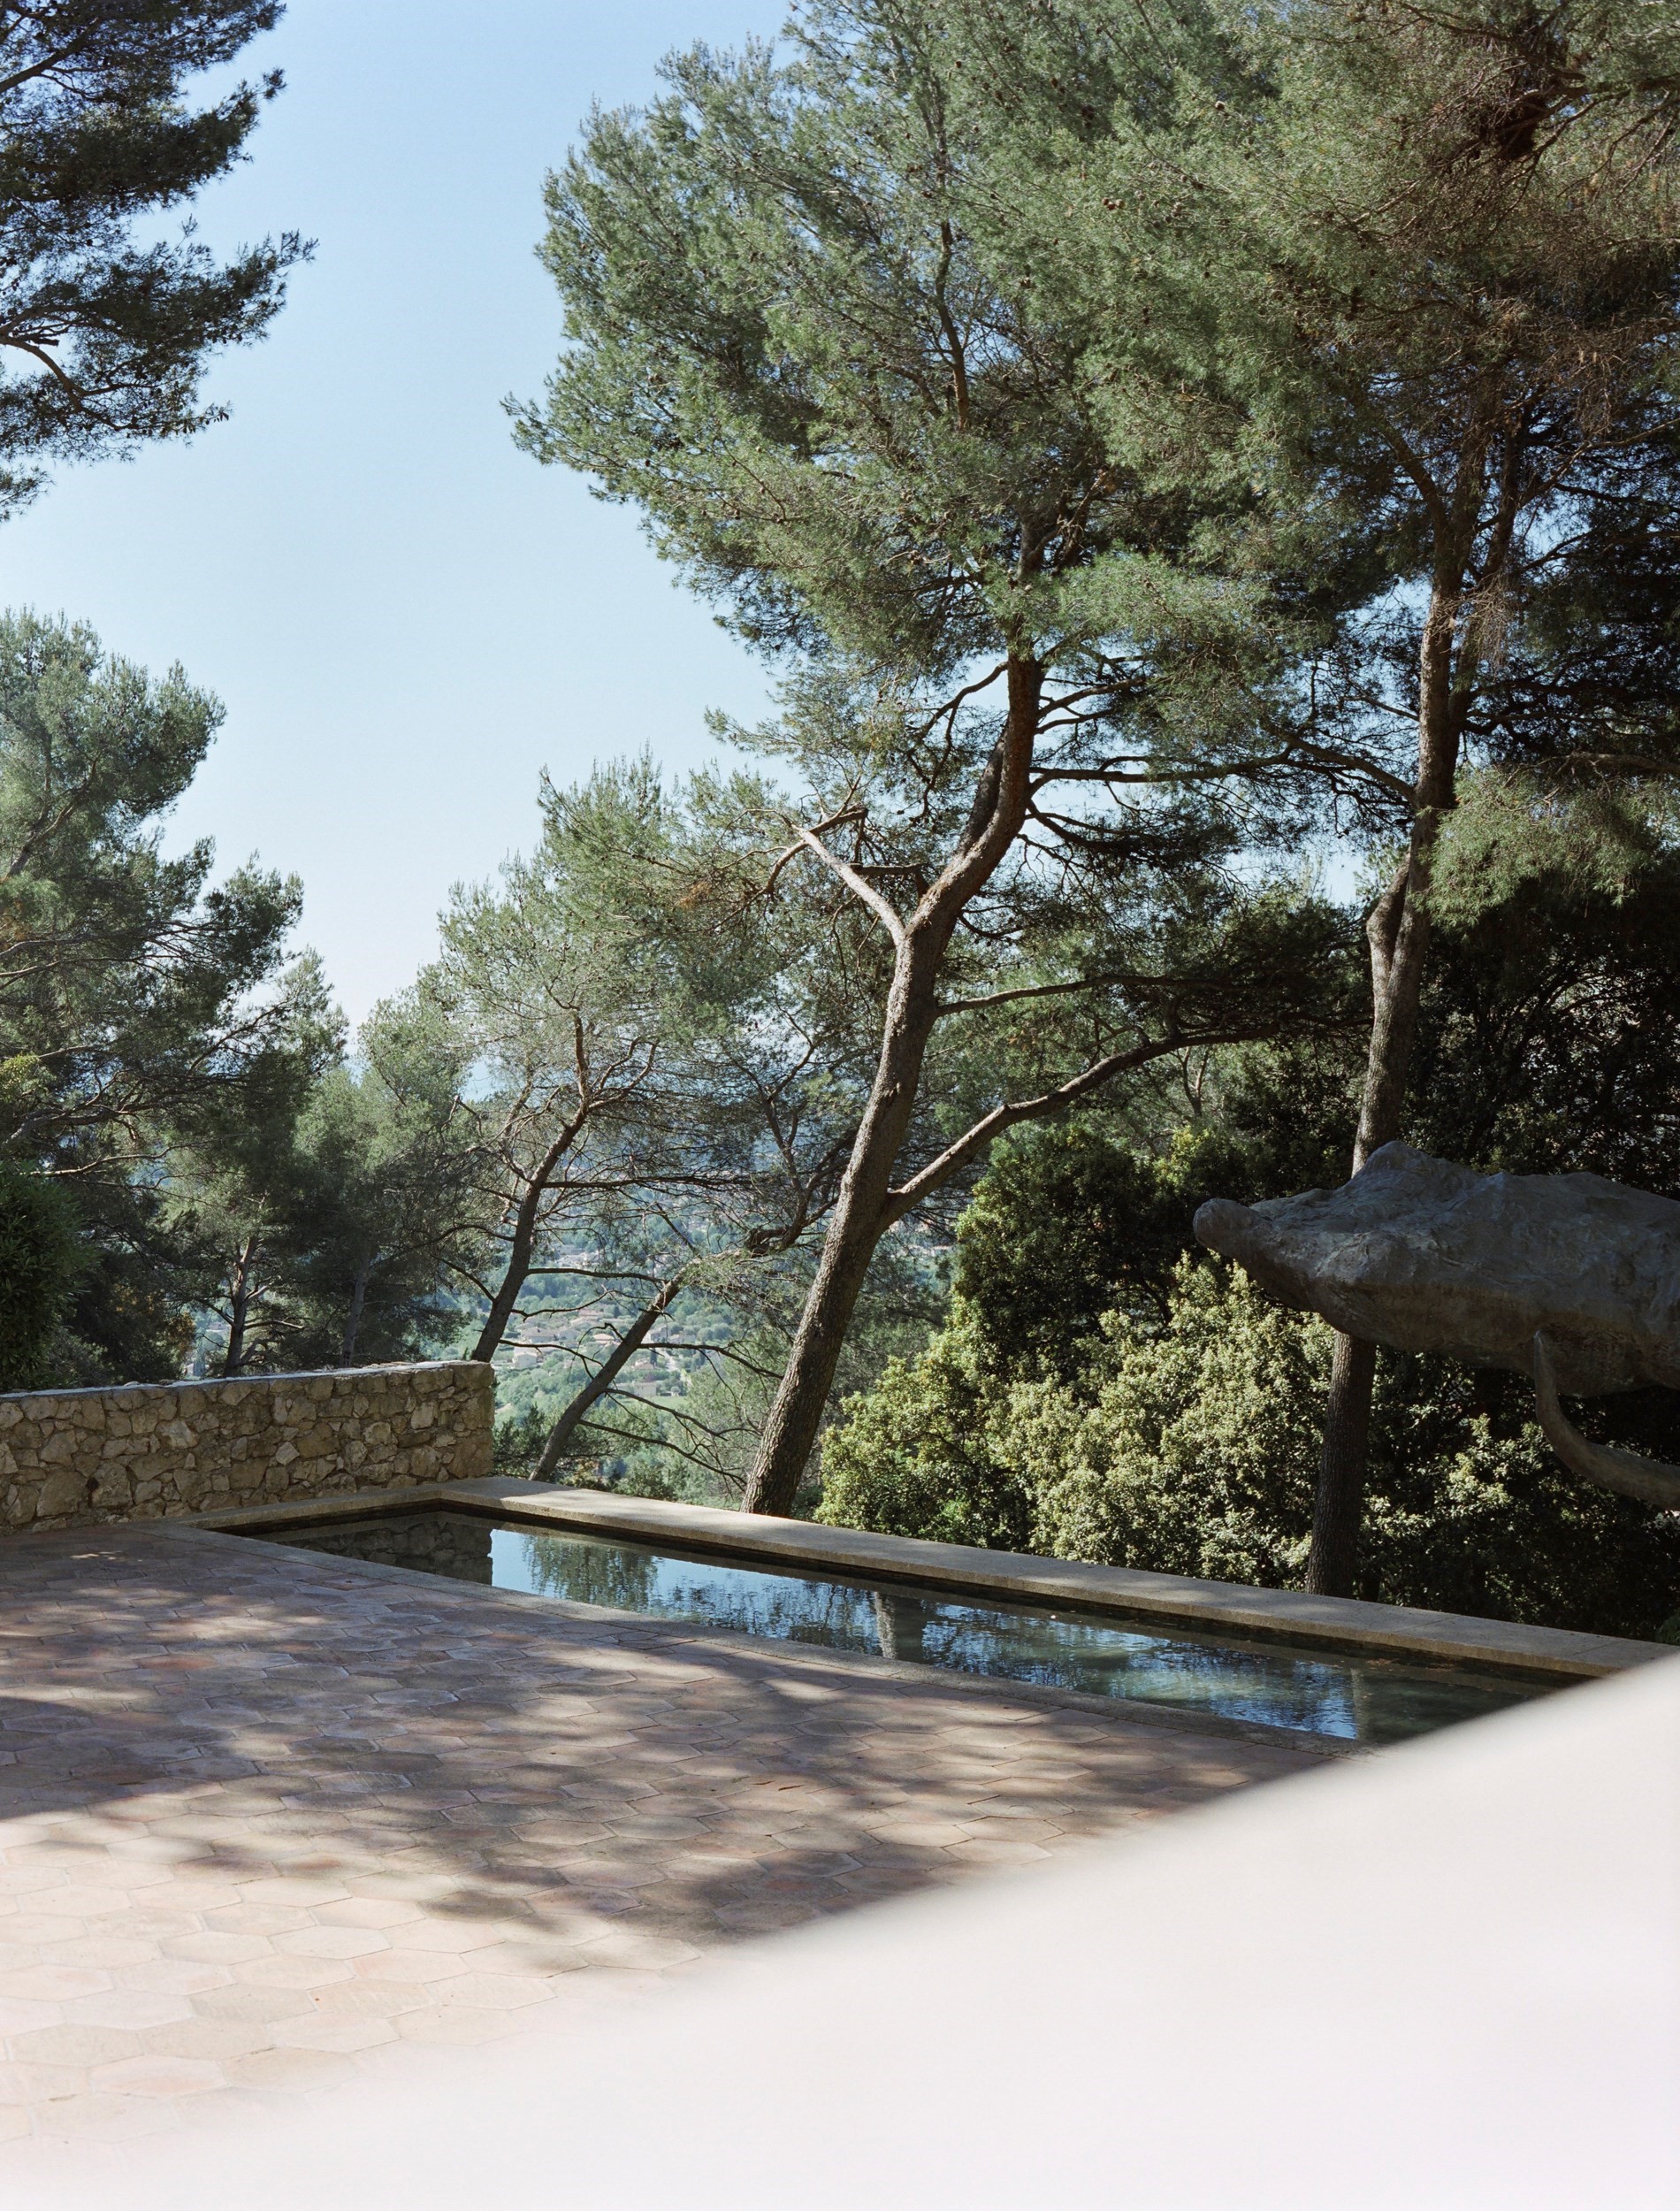 Louis Vuitton: Cruise 2019 works the magic in the Fondation Maeght